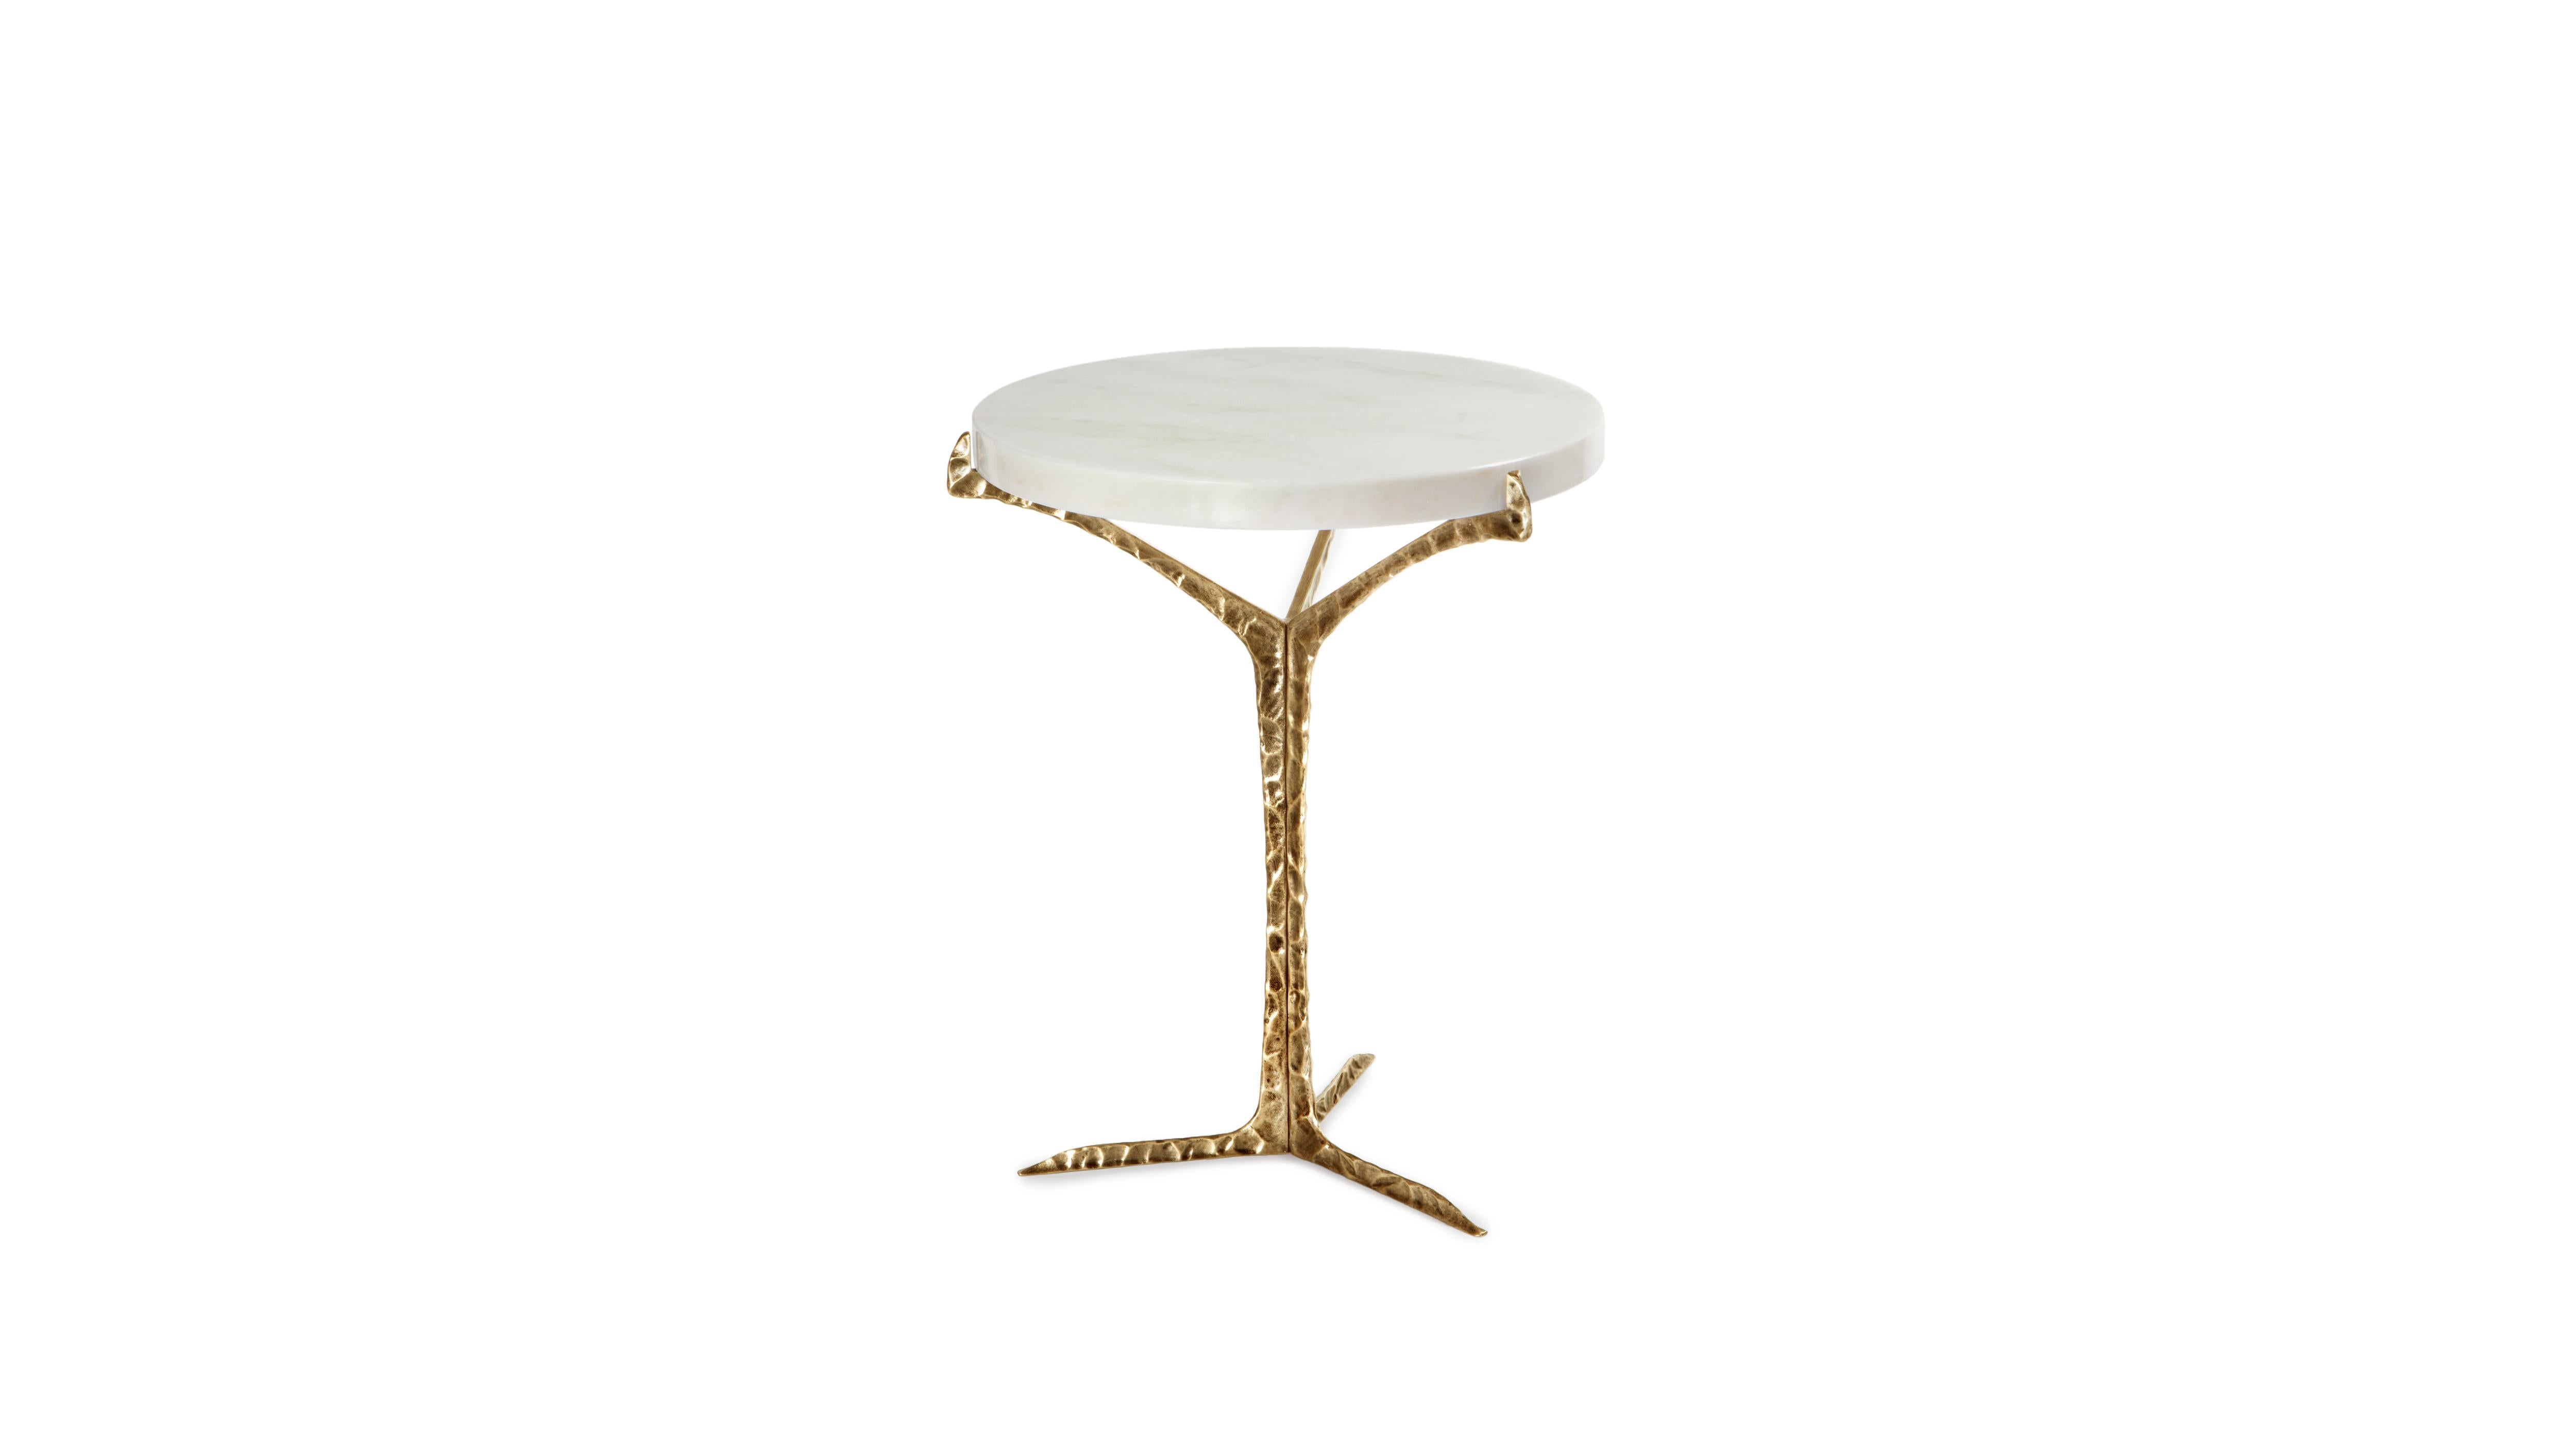 Alentejo Estremoz Marble Side Table by InsidherLand
Dimensions: D 49 x W 49 x H 60 cm.
Materials: Estremoz marble, cast brass with patinated effect.
15 kg.
Other materials available.

Alentejo side table is a glimpse over the South of Portugal where